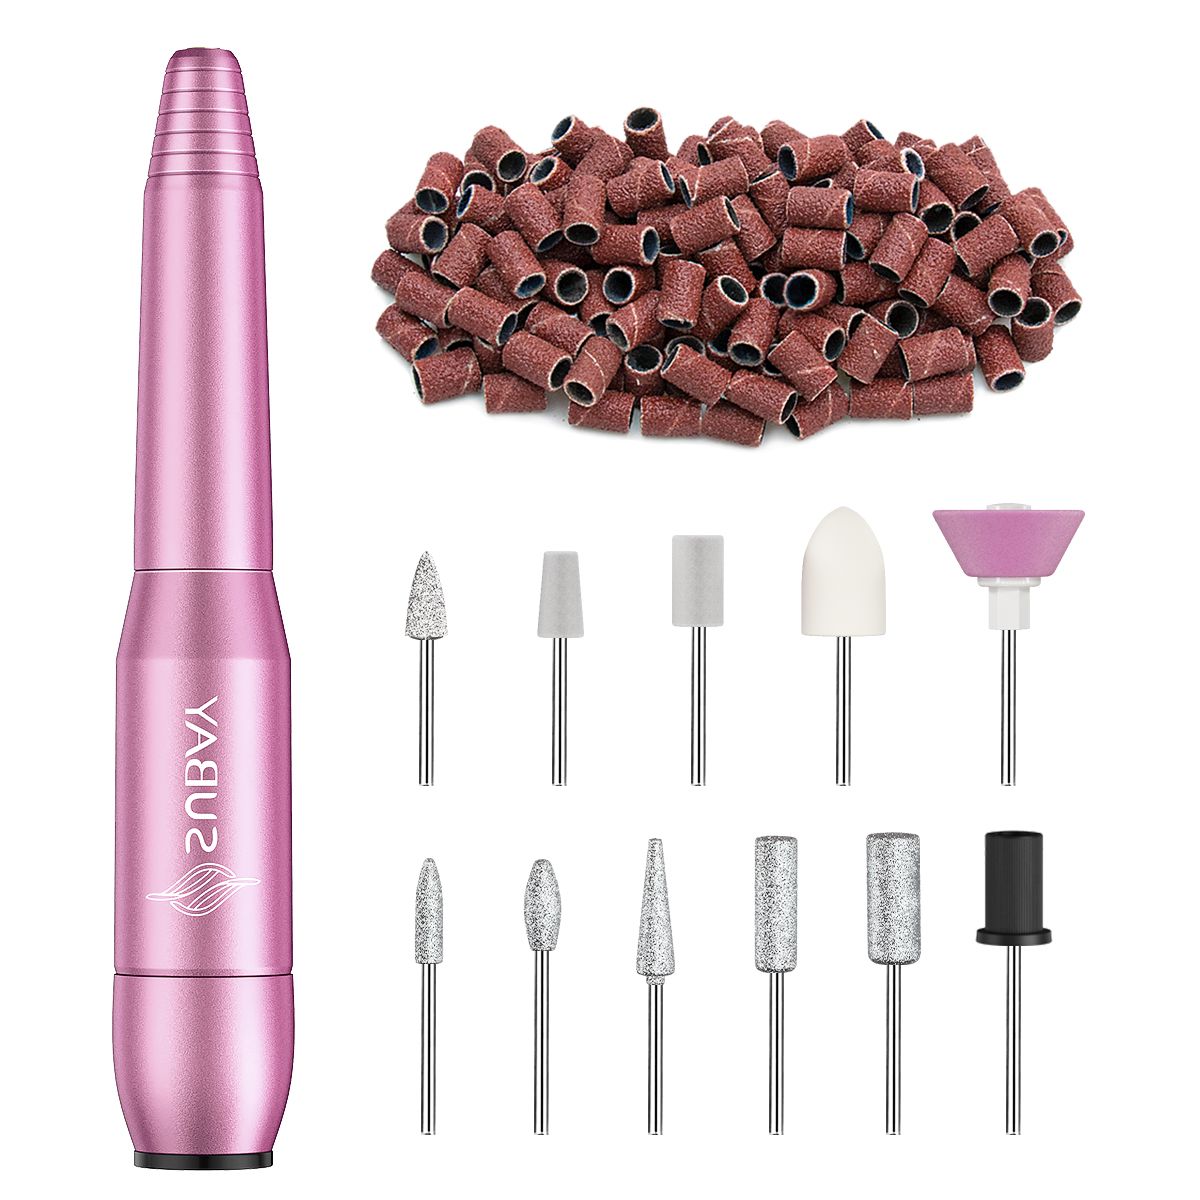 Acrylic Electric Nail Drill Portable Electric Nail File For Gel Nails  Acrylic Nails Professional Efile With 11 Nail Drill Bits And 40 Sanding  Bands For Manicure Pedicure Polishing Shaping - Beauty &